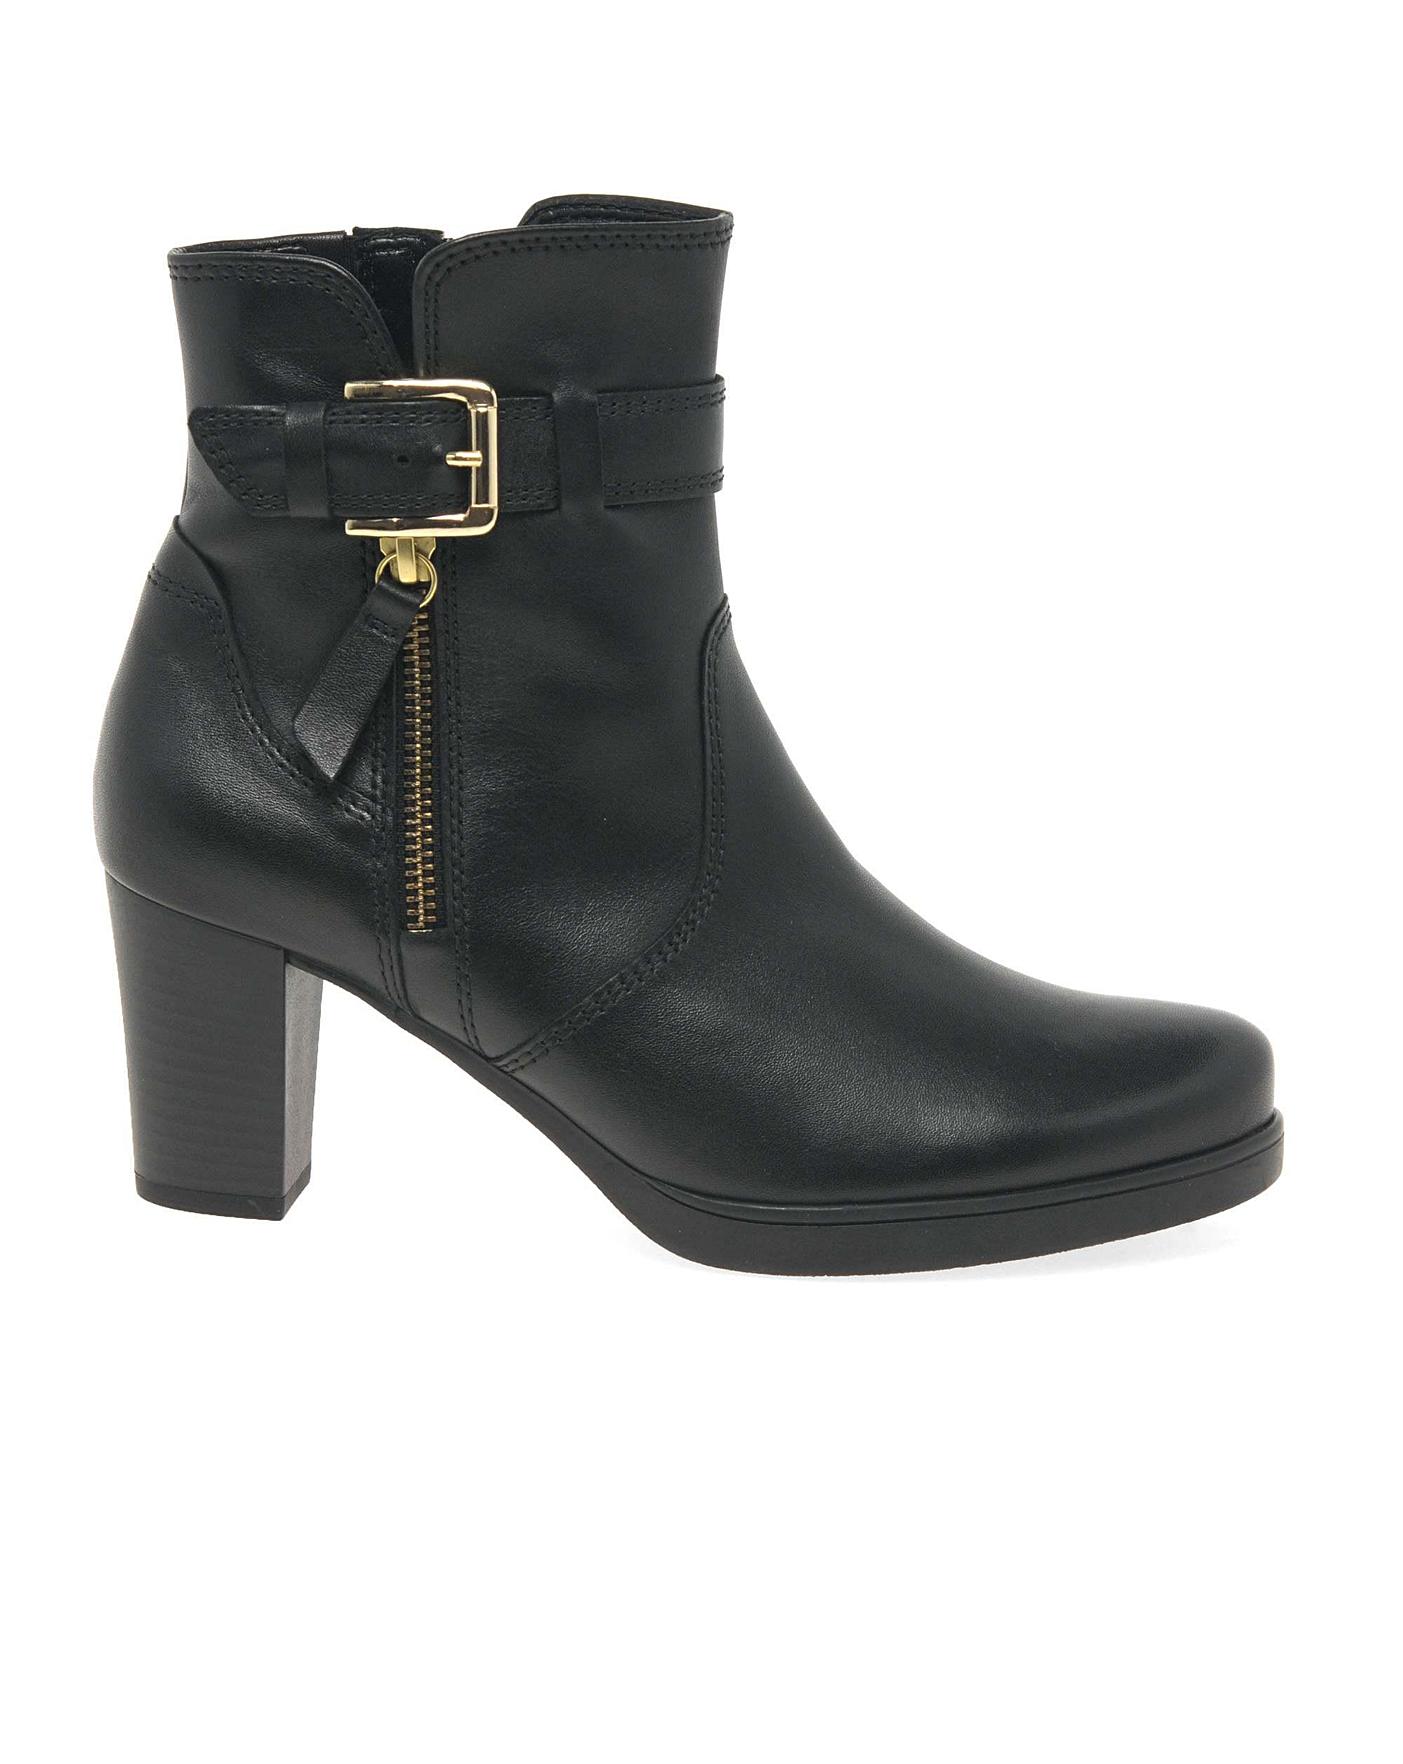 cheap wide fit ankle boots